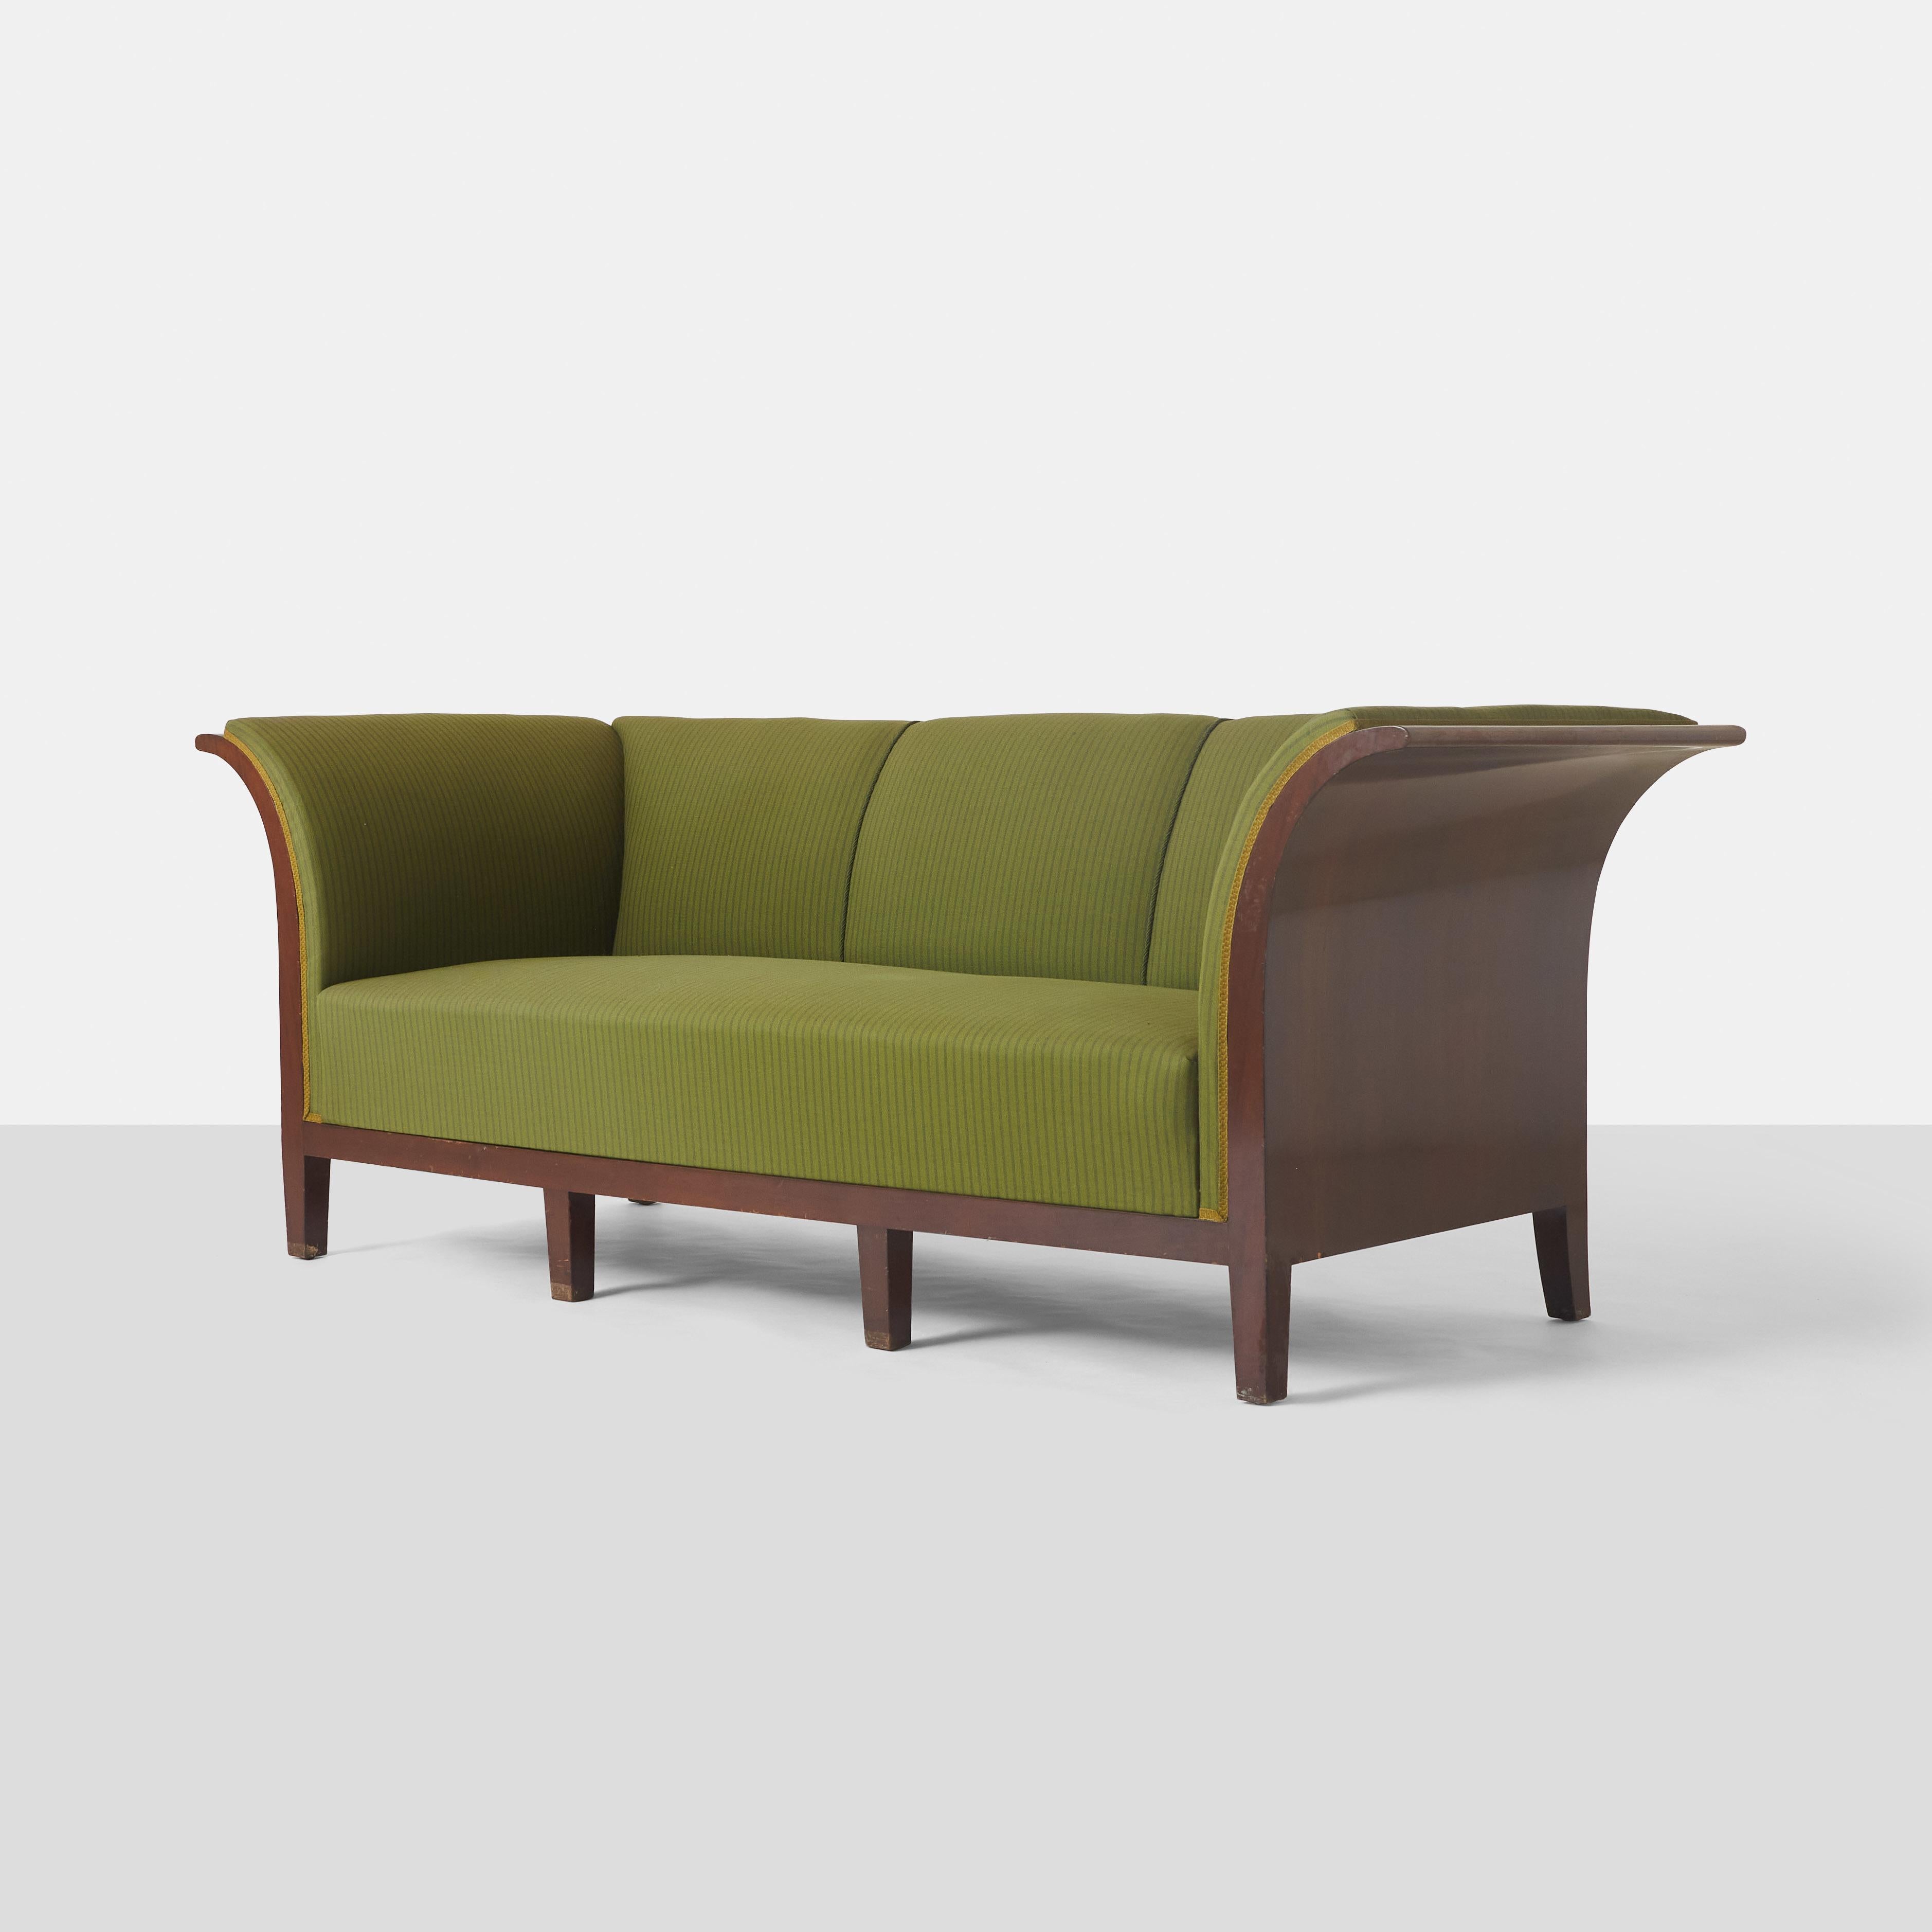 A three seater sofa designed and produced by Frits Henningsen with a mahogany frame, high back and curved armrests. 

The frame’s structure is sturdy, while the springs and upholstery are tired, making it an ideal candidate for restoration to